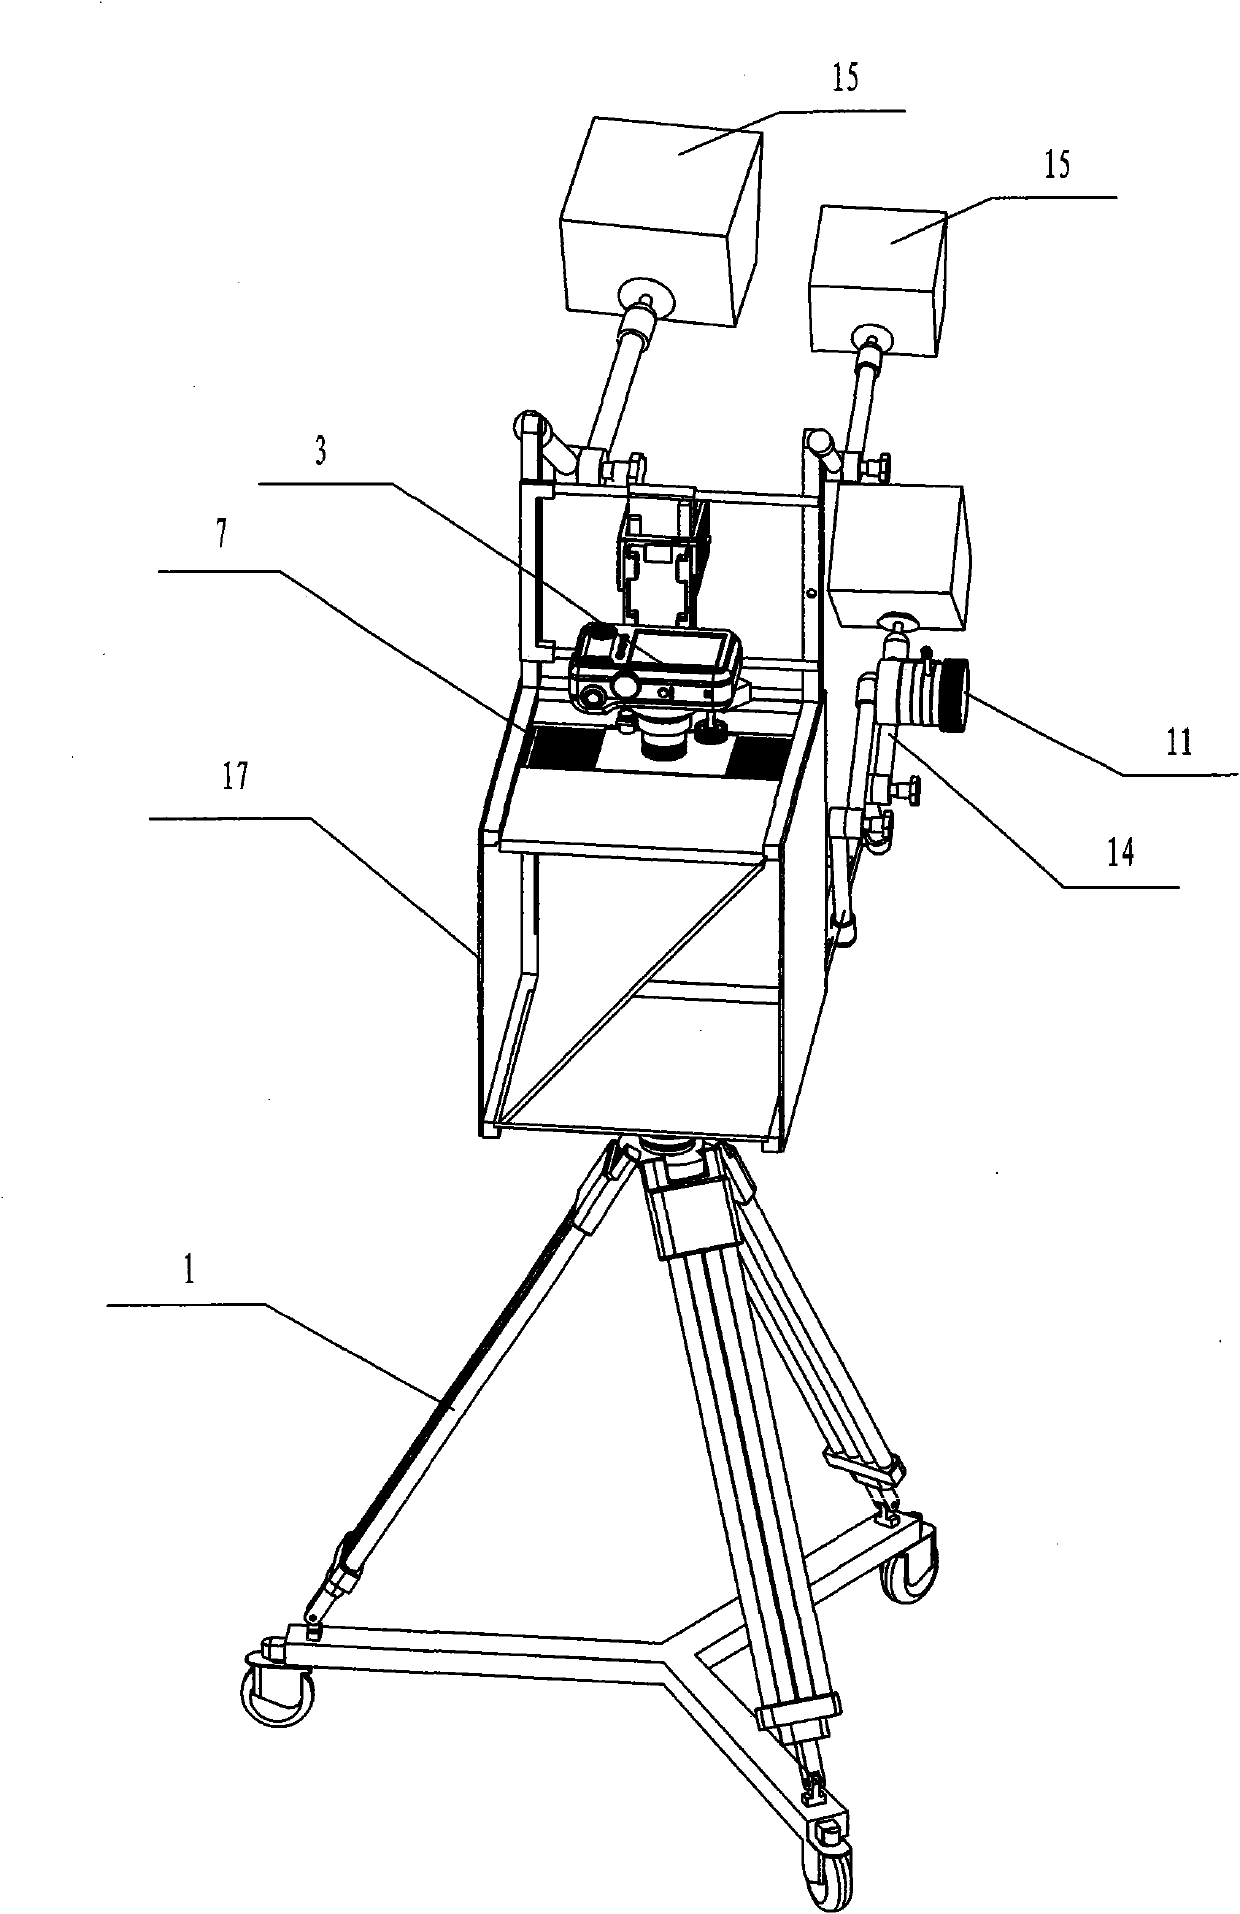 3D (Three-Dimensional) image shooting device